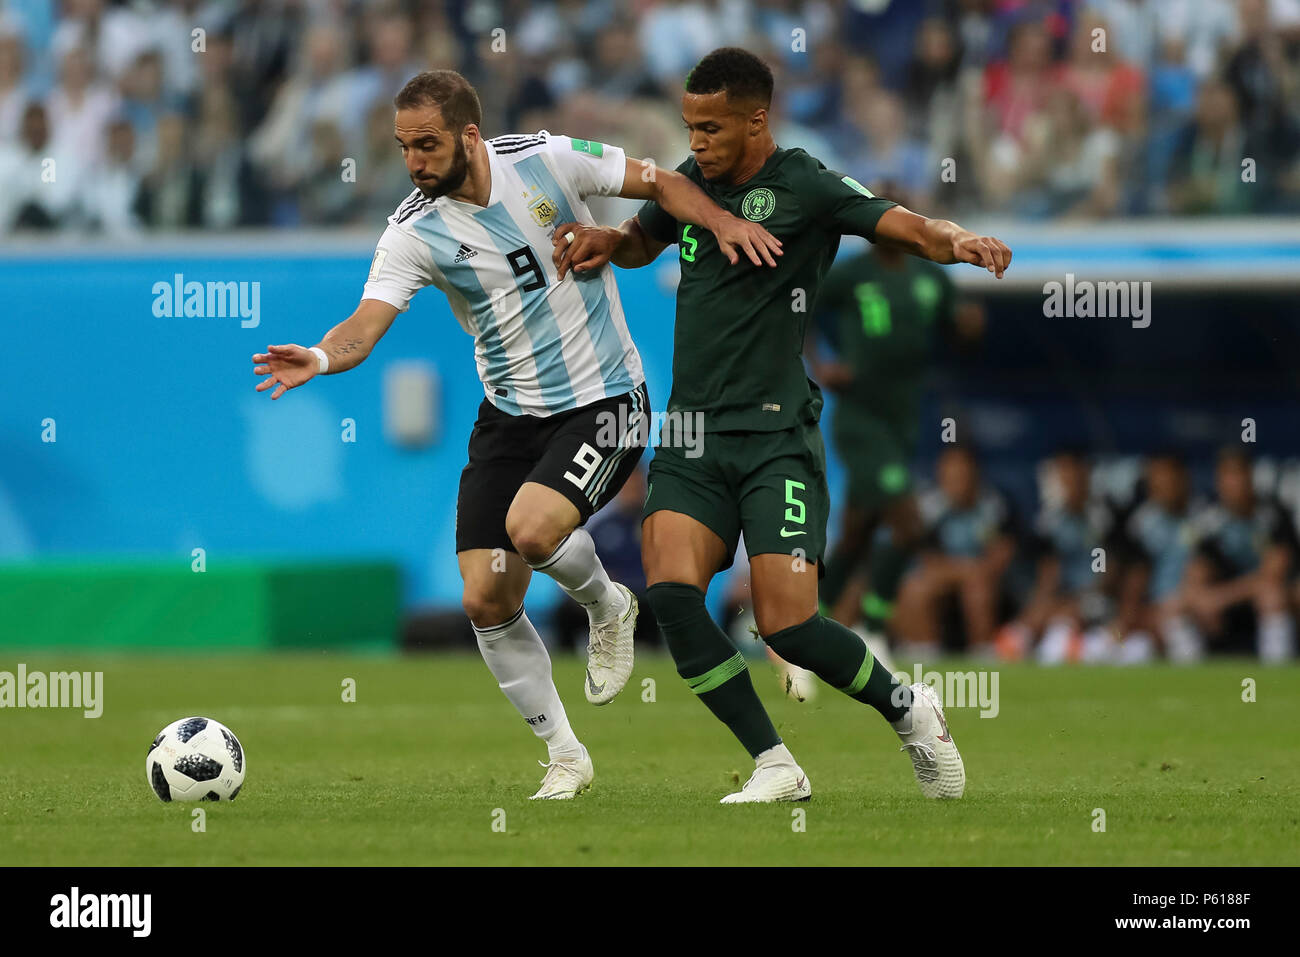 St Petersburg, Russia. 26th Jun, 2018. Gonzalo Higuain of Argentina and William Troost-Ekong of Nigeria during the 2018 FIFA World Cup Group D match between Nigeria and Argentina at Saint Petersburg Stadium on June 26th 2018 in Saint Petersburg, Russia. (Photo by Daniel Chesterton/phcimages.com) Credit: PHC Images/Alamy Live News Stock Photo